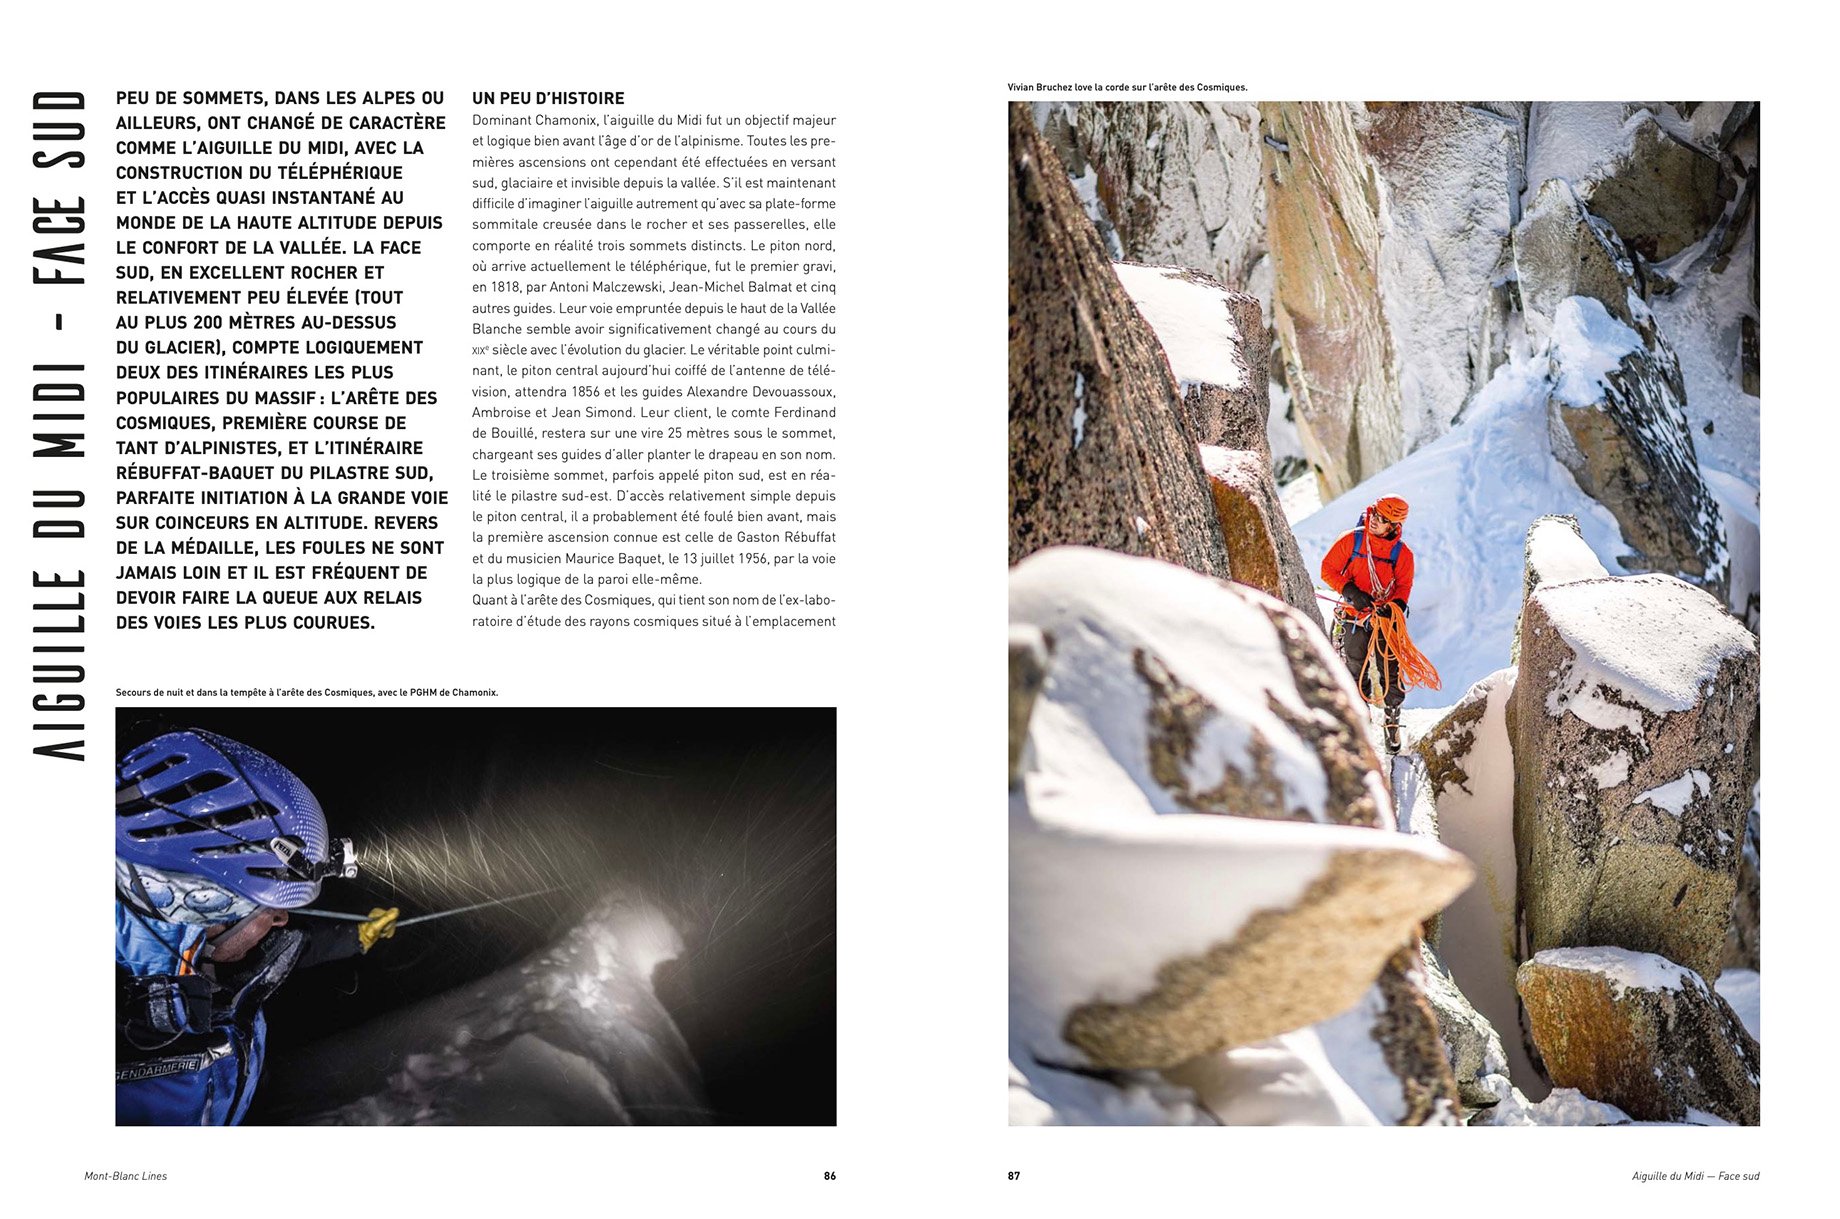 Tearsheet from Mont Blanc Lines coffee table book shot by Alex Buisse